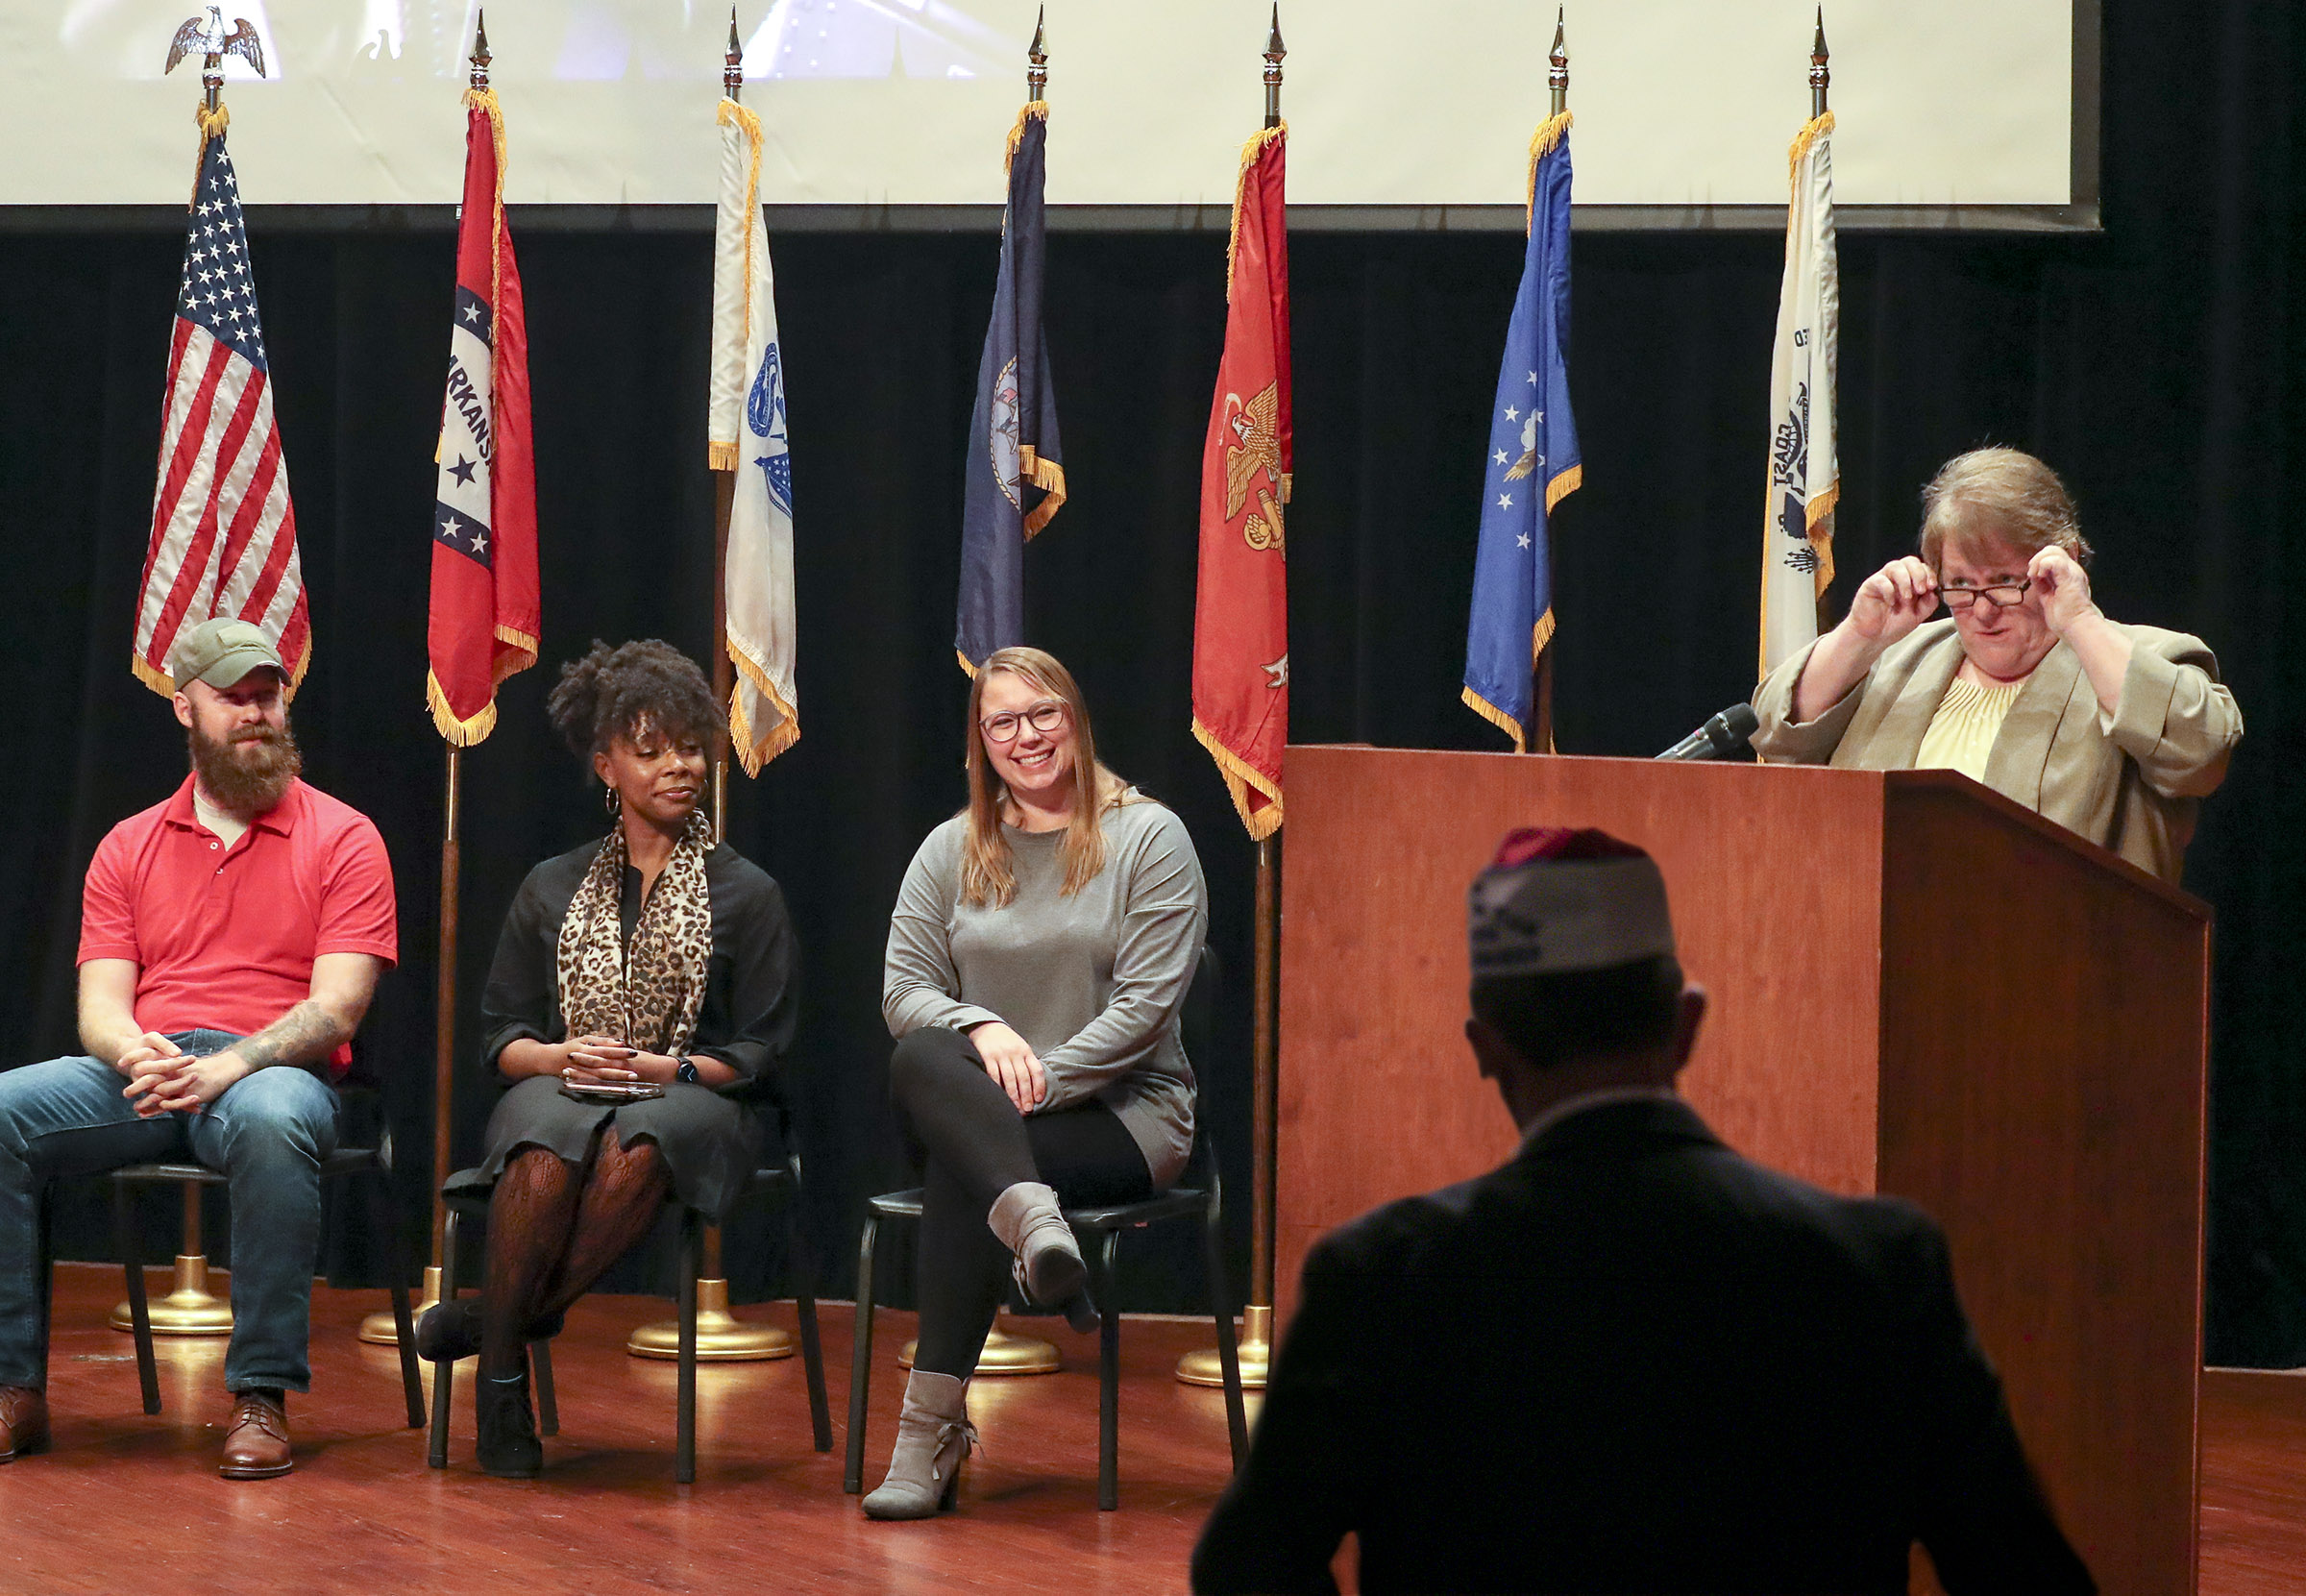 Kathy Oliverio right, honors UA Little Rock student veterans, from left, Sean Lewis, Alexis Harris, and Kaycee Greenwood, who participated in a Veterans Day ceremony. Photo by Ben Krain.